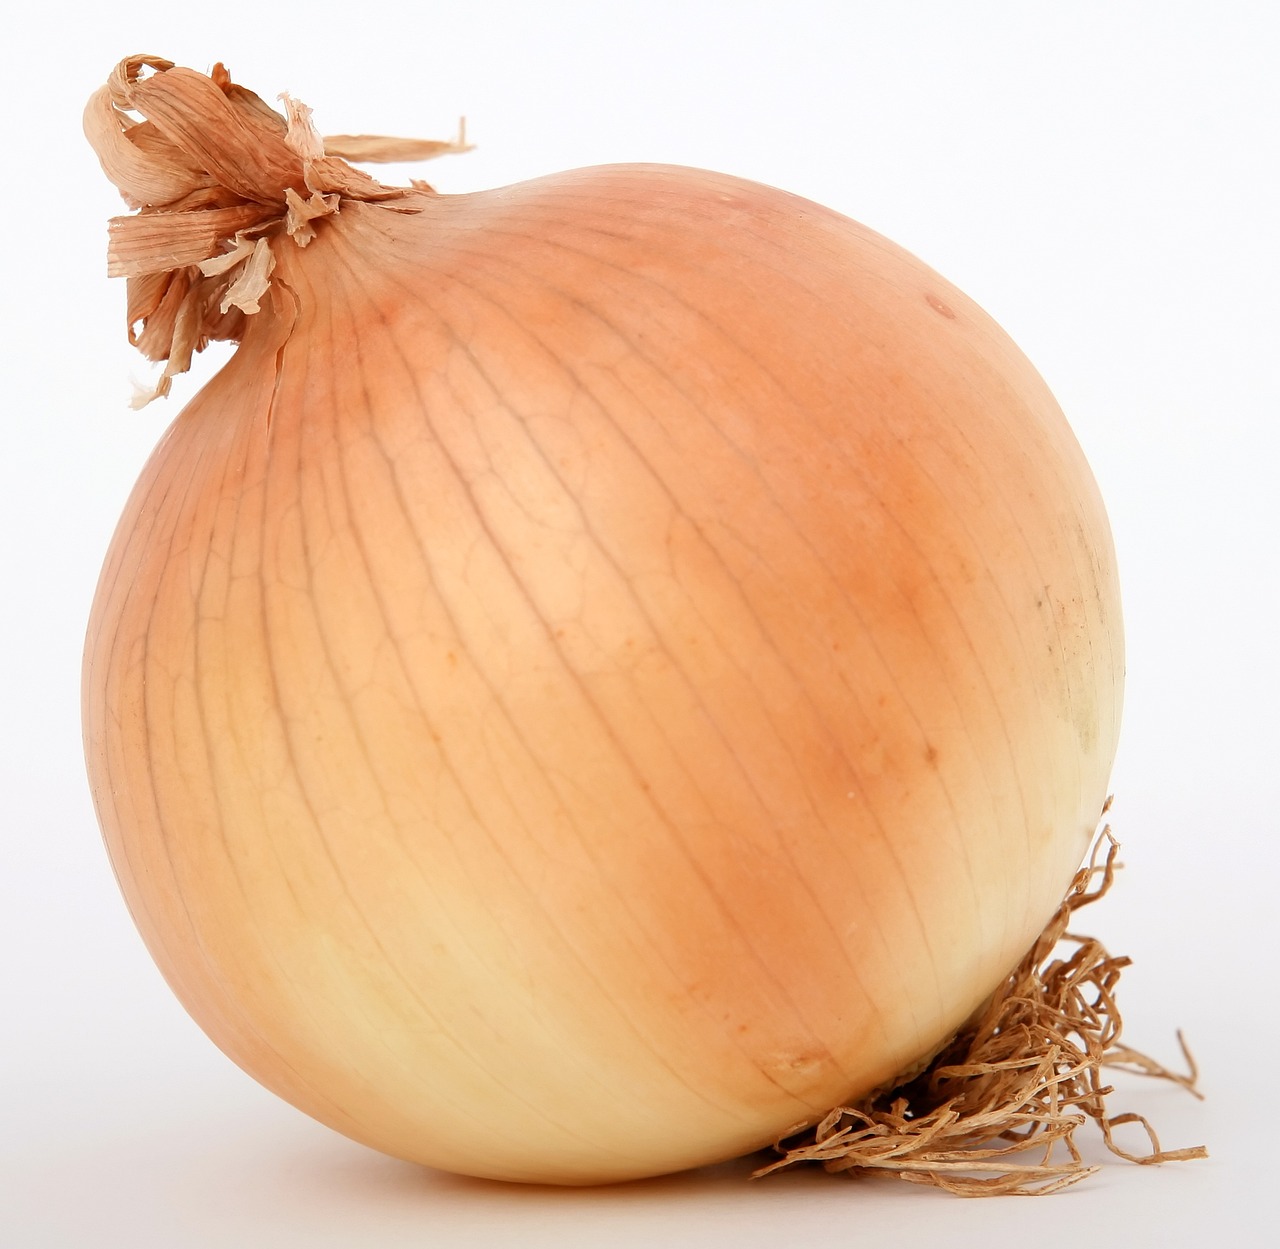 a close up of an onion on a white surface, a picture, renaissance, istockphoto, straw, slight overcast weather, balloon